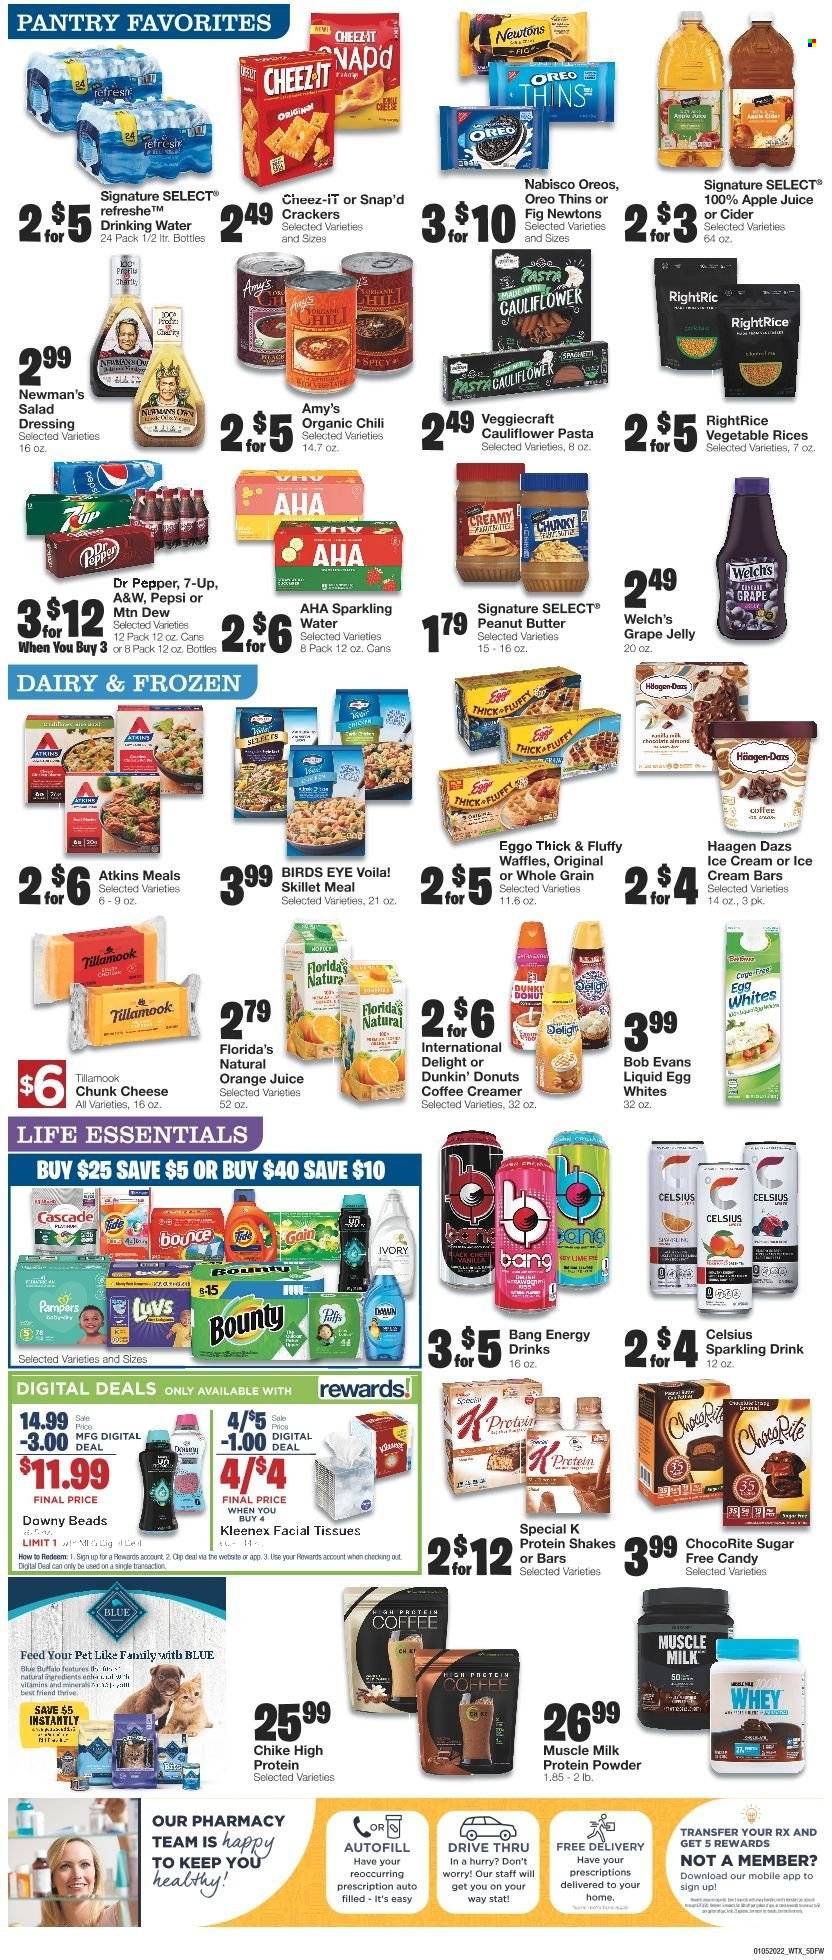 thumbnail - Market Street Flyer - 01/05/2022 - 01/11/2022 - Sales products - waffles, Dunkin' Donuts, Welch's, pasta, Bird's Eye, Bob Evans, chunk cheese, Oreo, protein drink, shake, muscle milk, eggs, creamer, ice cream bars, Häagen-Dazs, Bounty, jelly, crackers, Florida's Natural, Thins, Cheez-It, salad dressing, dressing, grape jelly, peanut butter, apple juice, Mountain Dew, Pepsi, orange juice, juice, energy drink, Dr. Pepper, 7UP, A&W, sparkling water, cider, Kleenex, tissues, Cascade, Bounce, facial tissues, whey protein. Page 5.